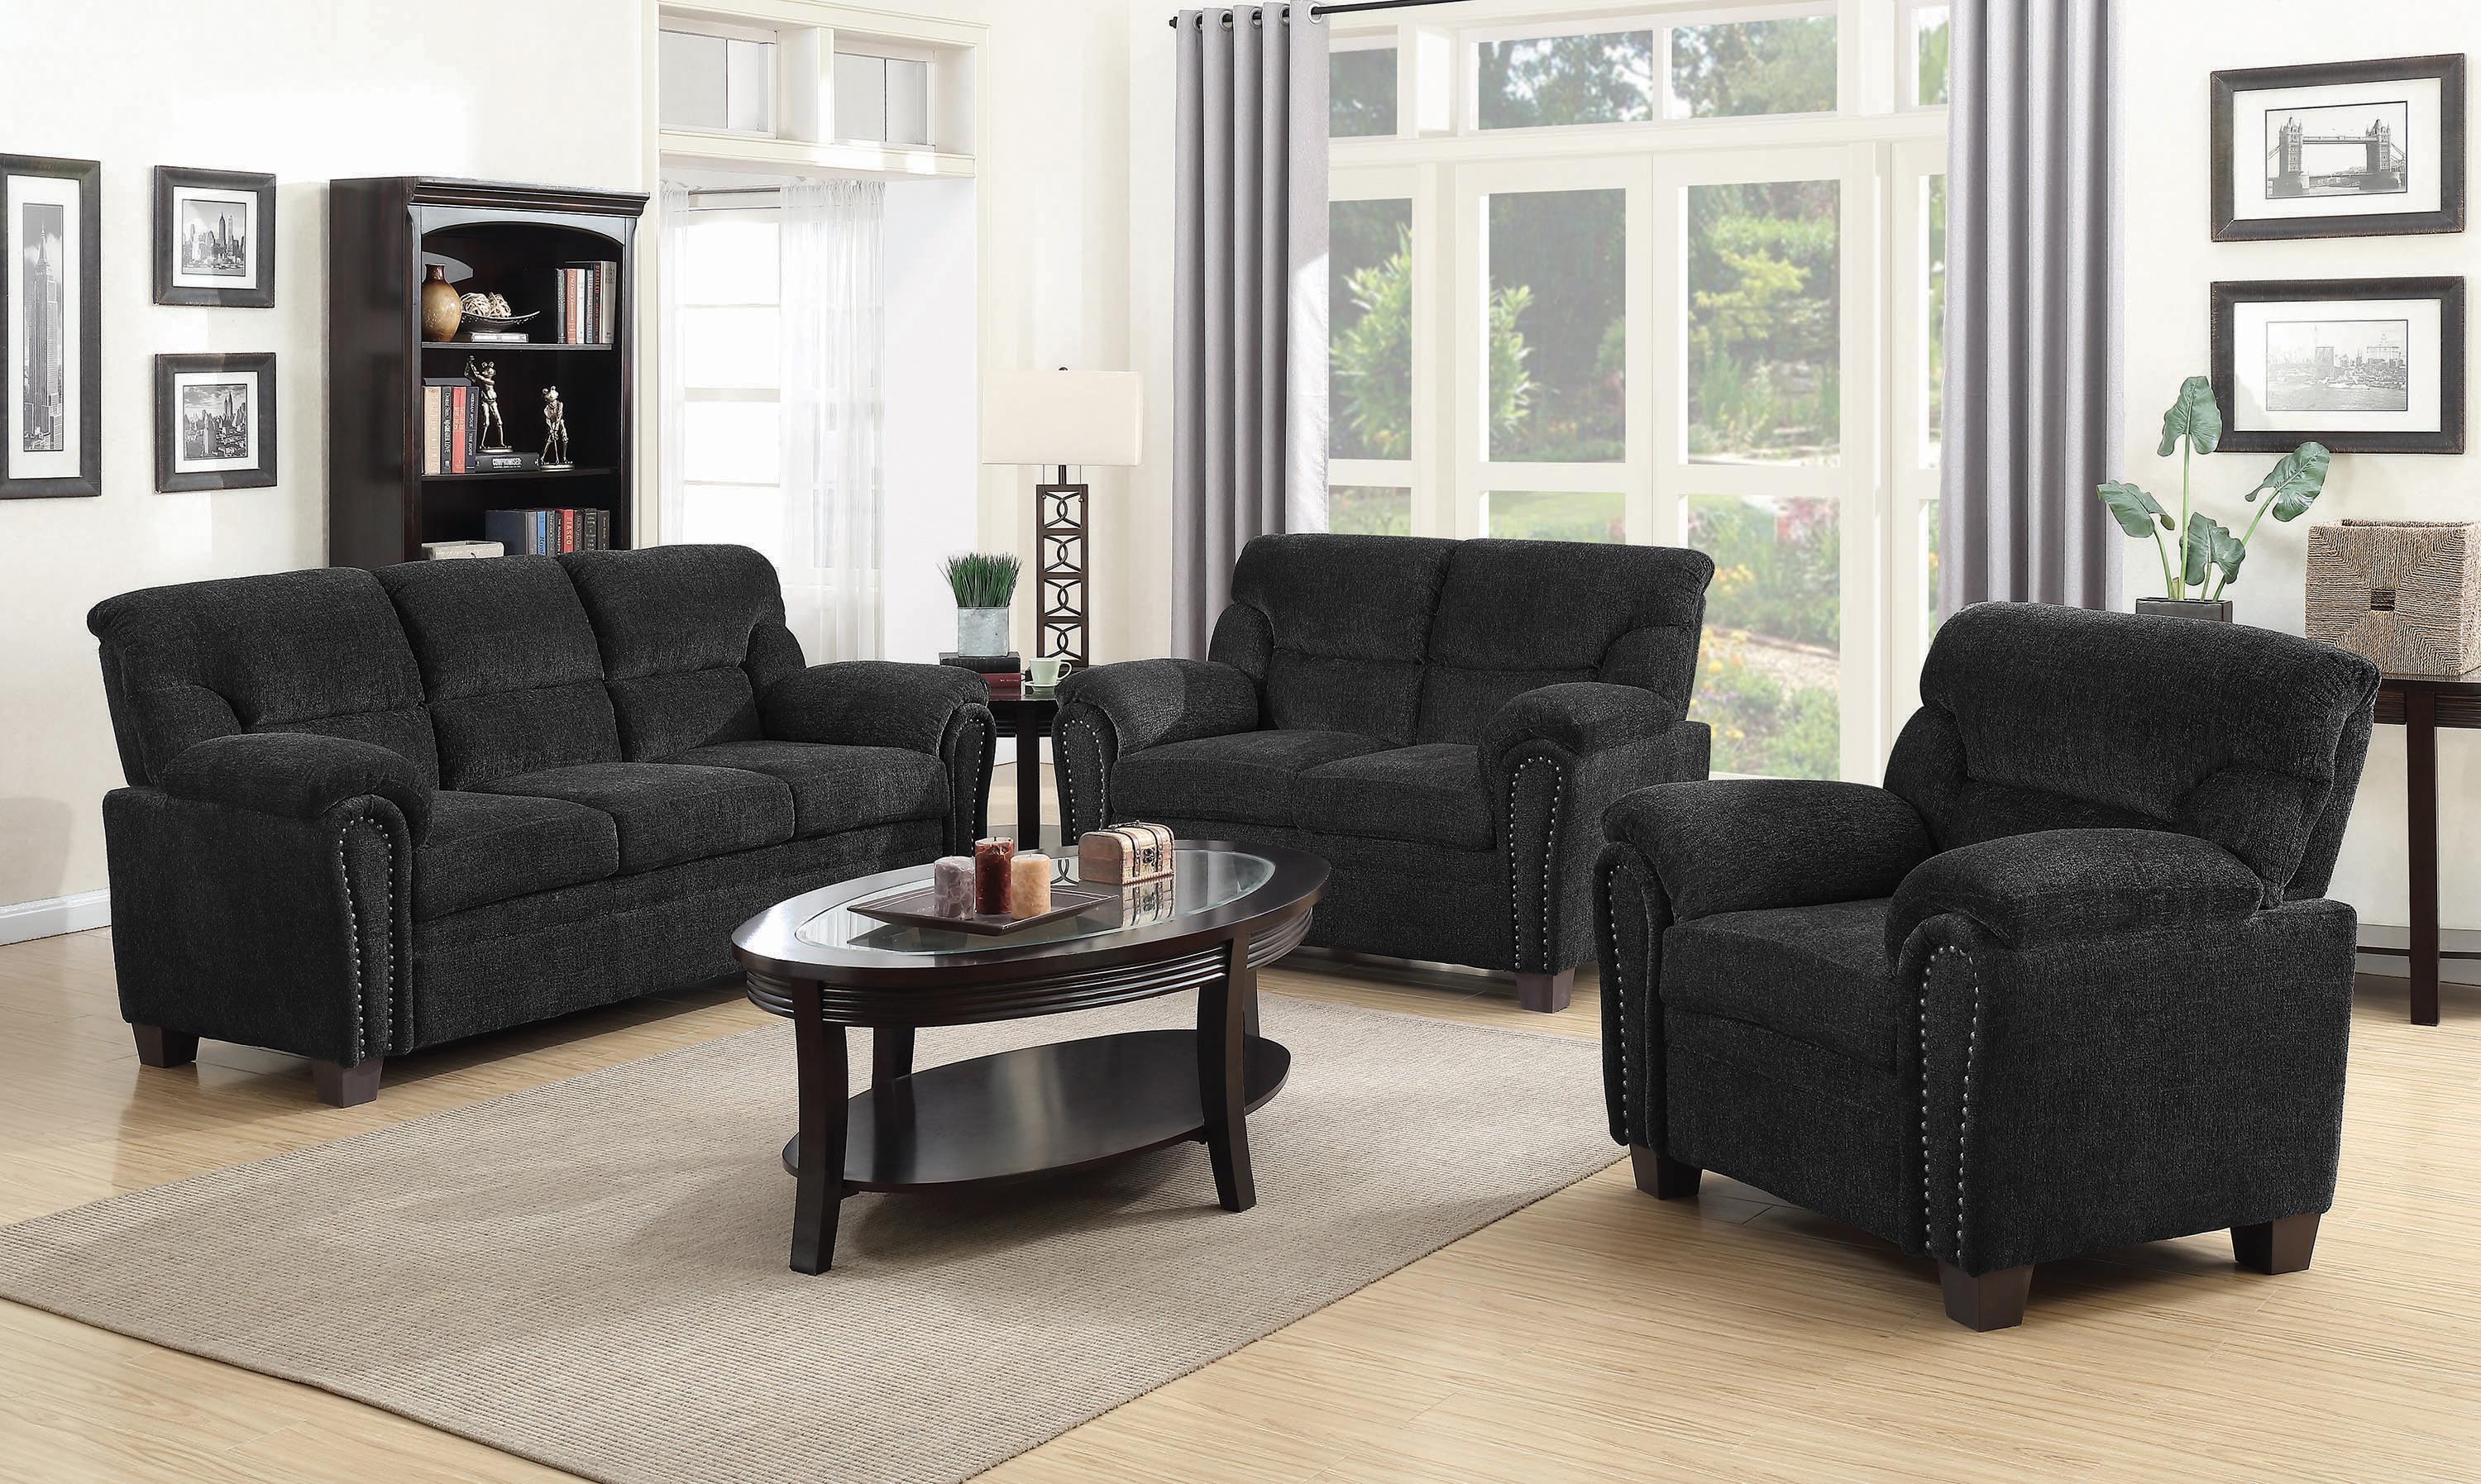 Transitional Living Room Set 506574-S3 Clemintine 506574-S3 in Graphite Chenille